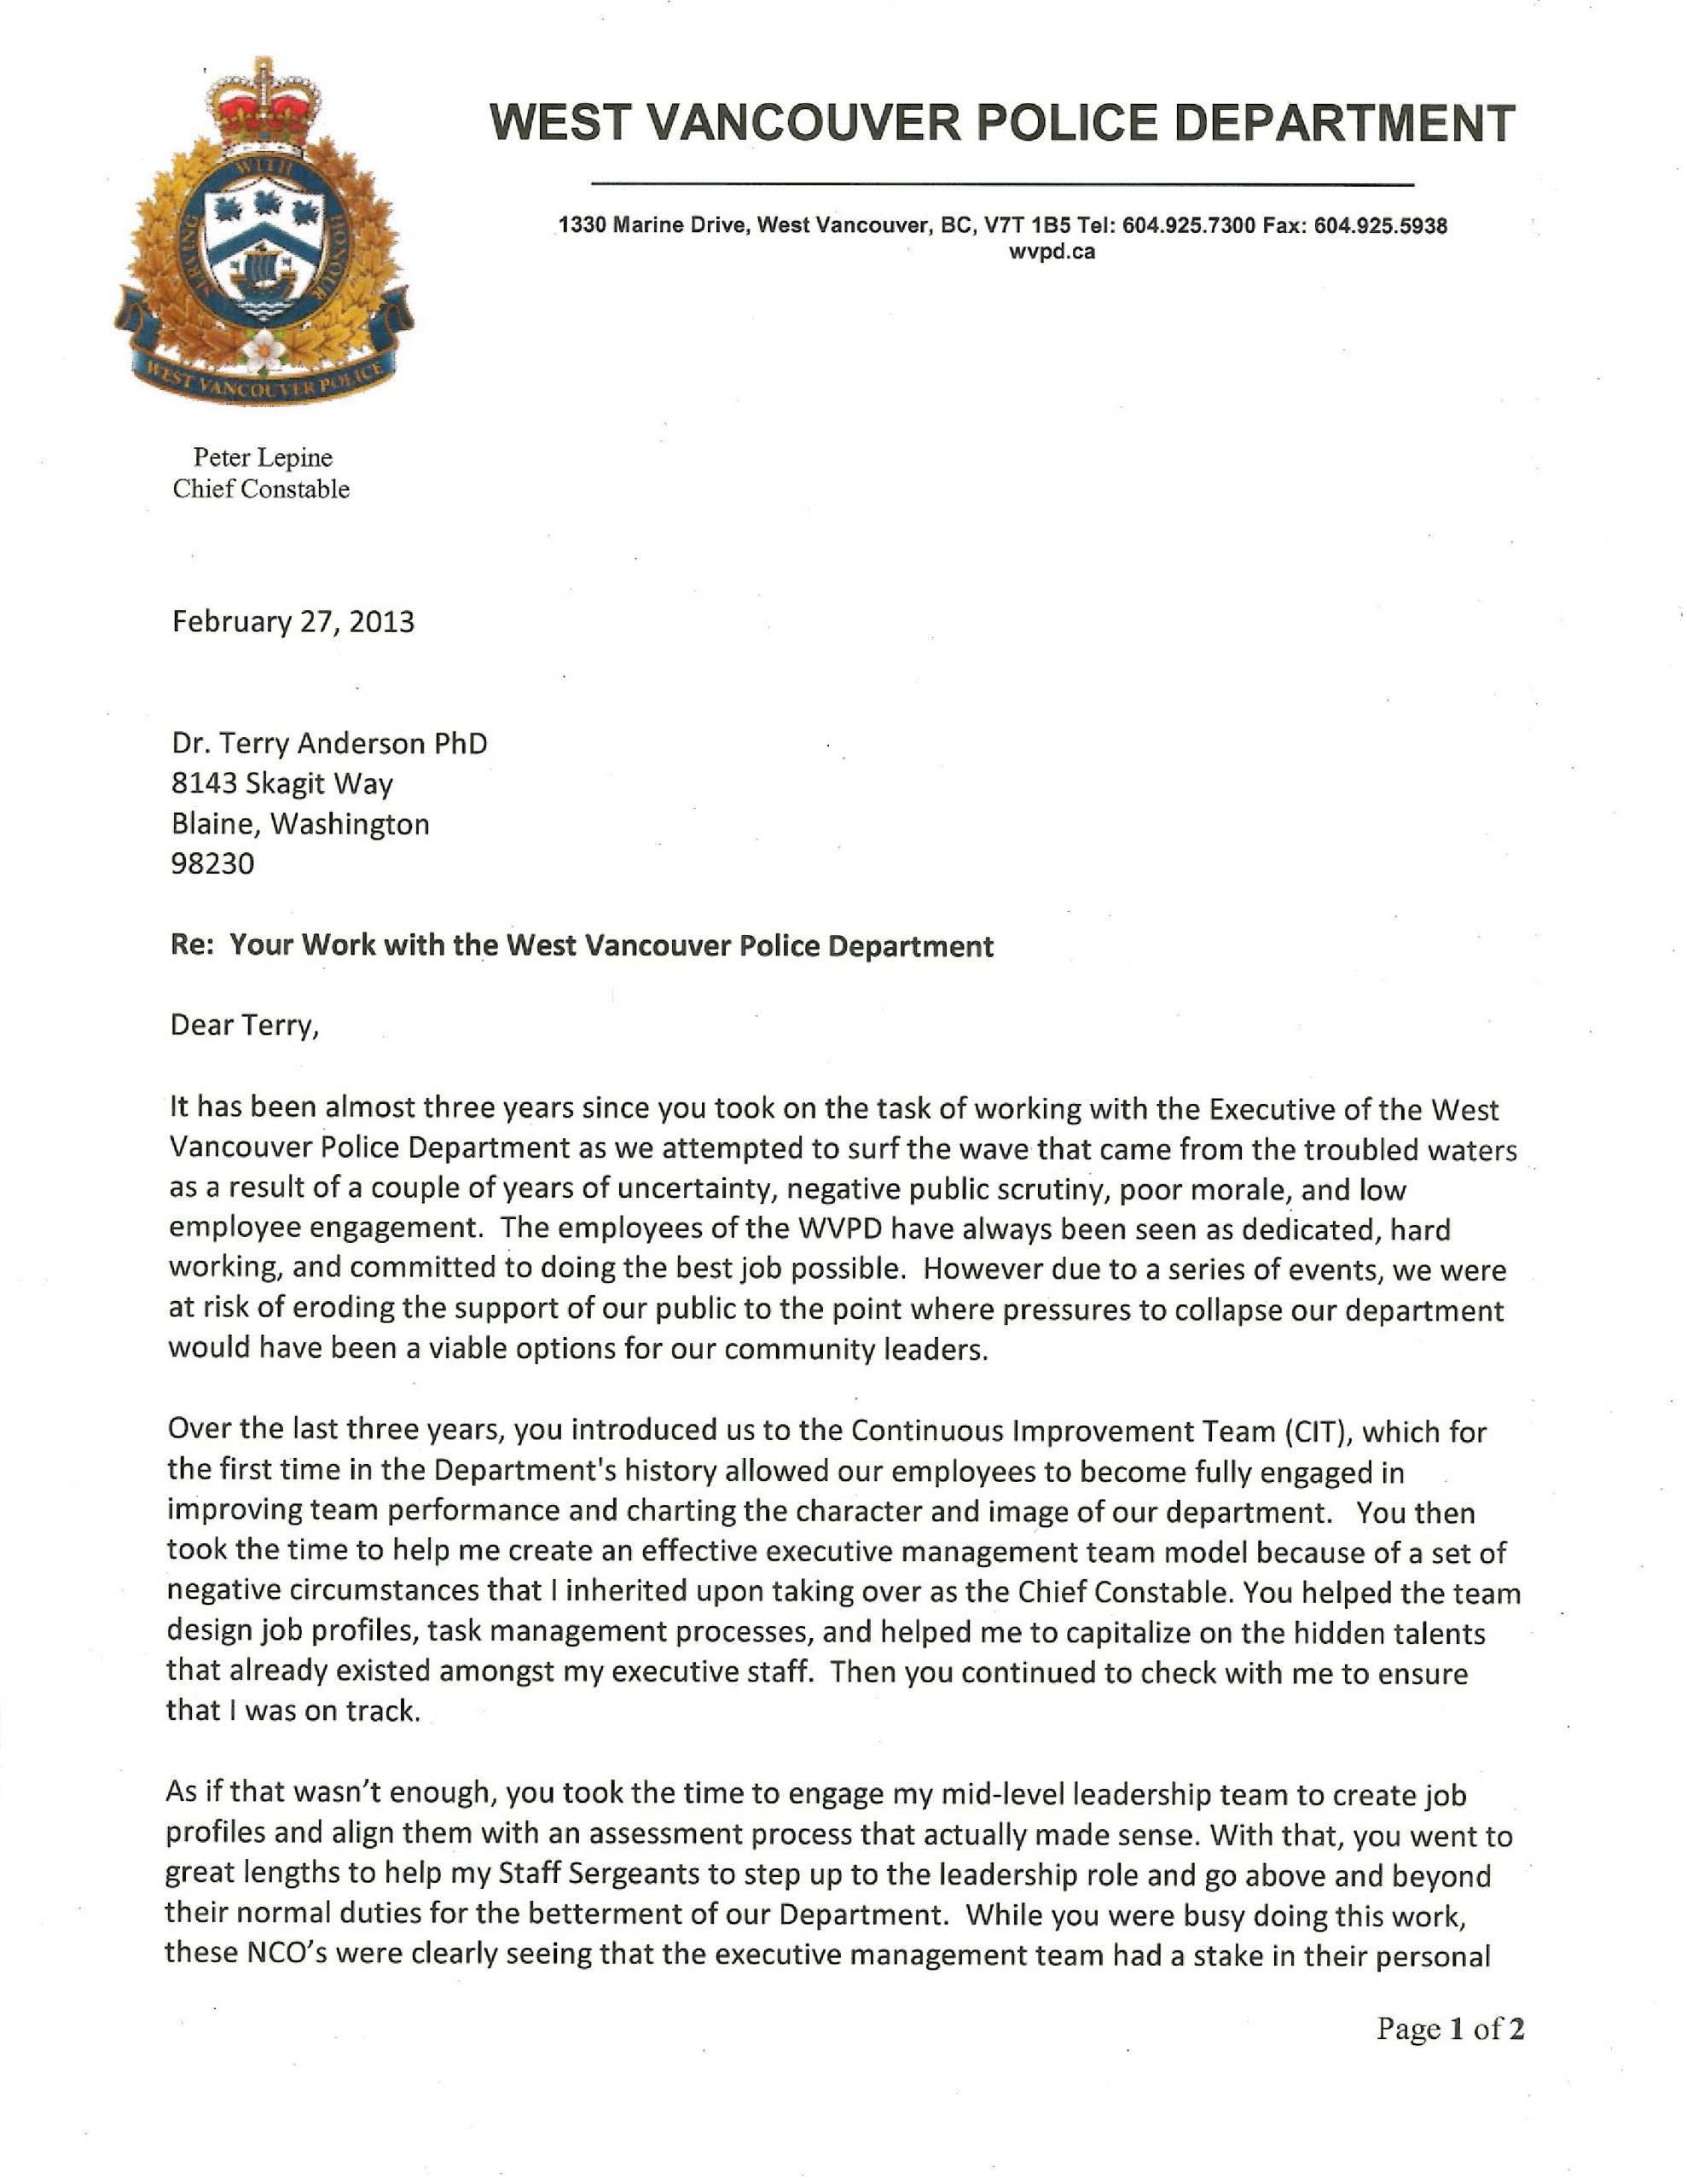 Letters Of Recommendation For Police Officers Free Resume intended for size 2550 X 3300